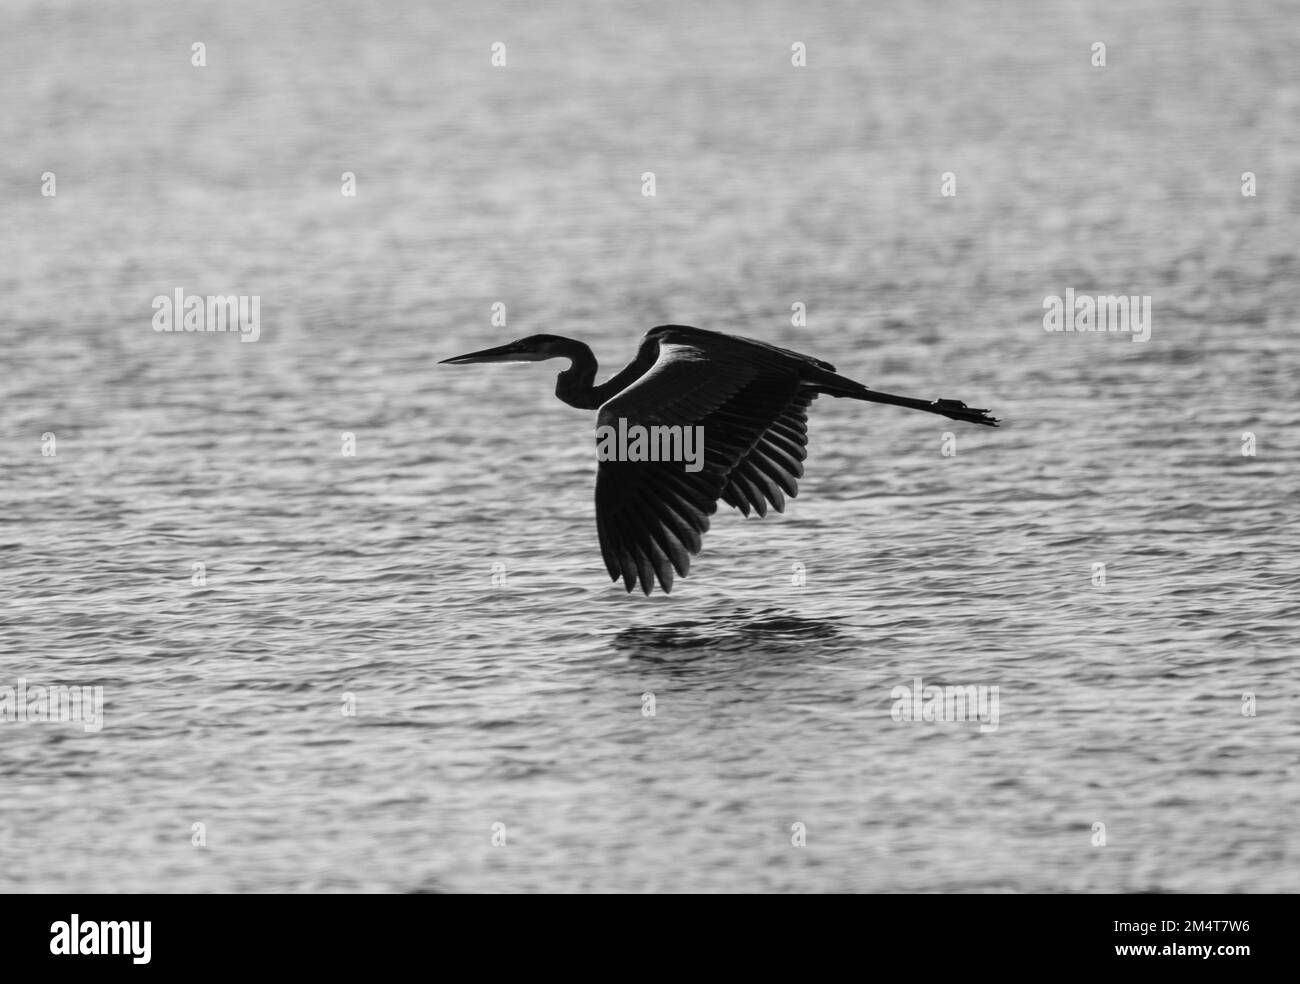 A scenic grayscale shot of a majestic gray heron in flight over tranquil water Stock Photo